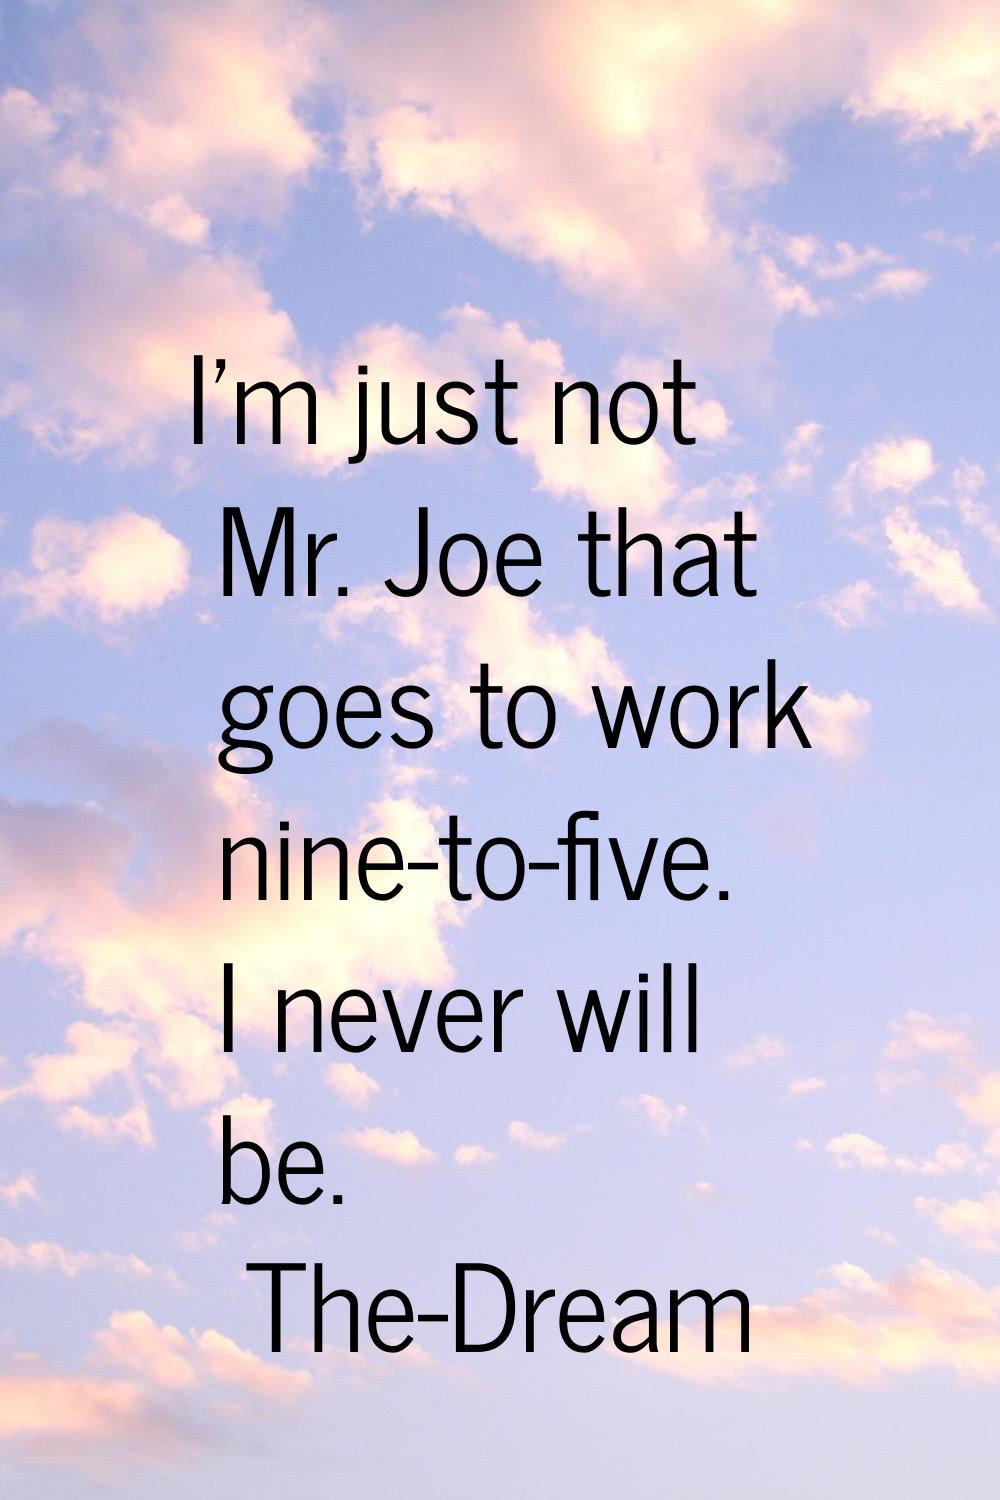 I'm just not Mr. Joe that goes to work nine-to-five. I never will be.